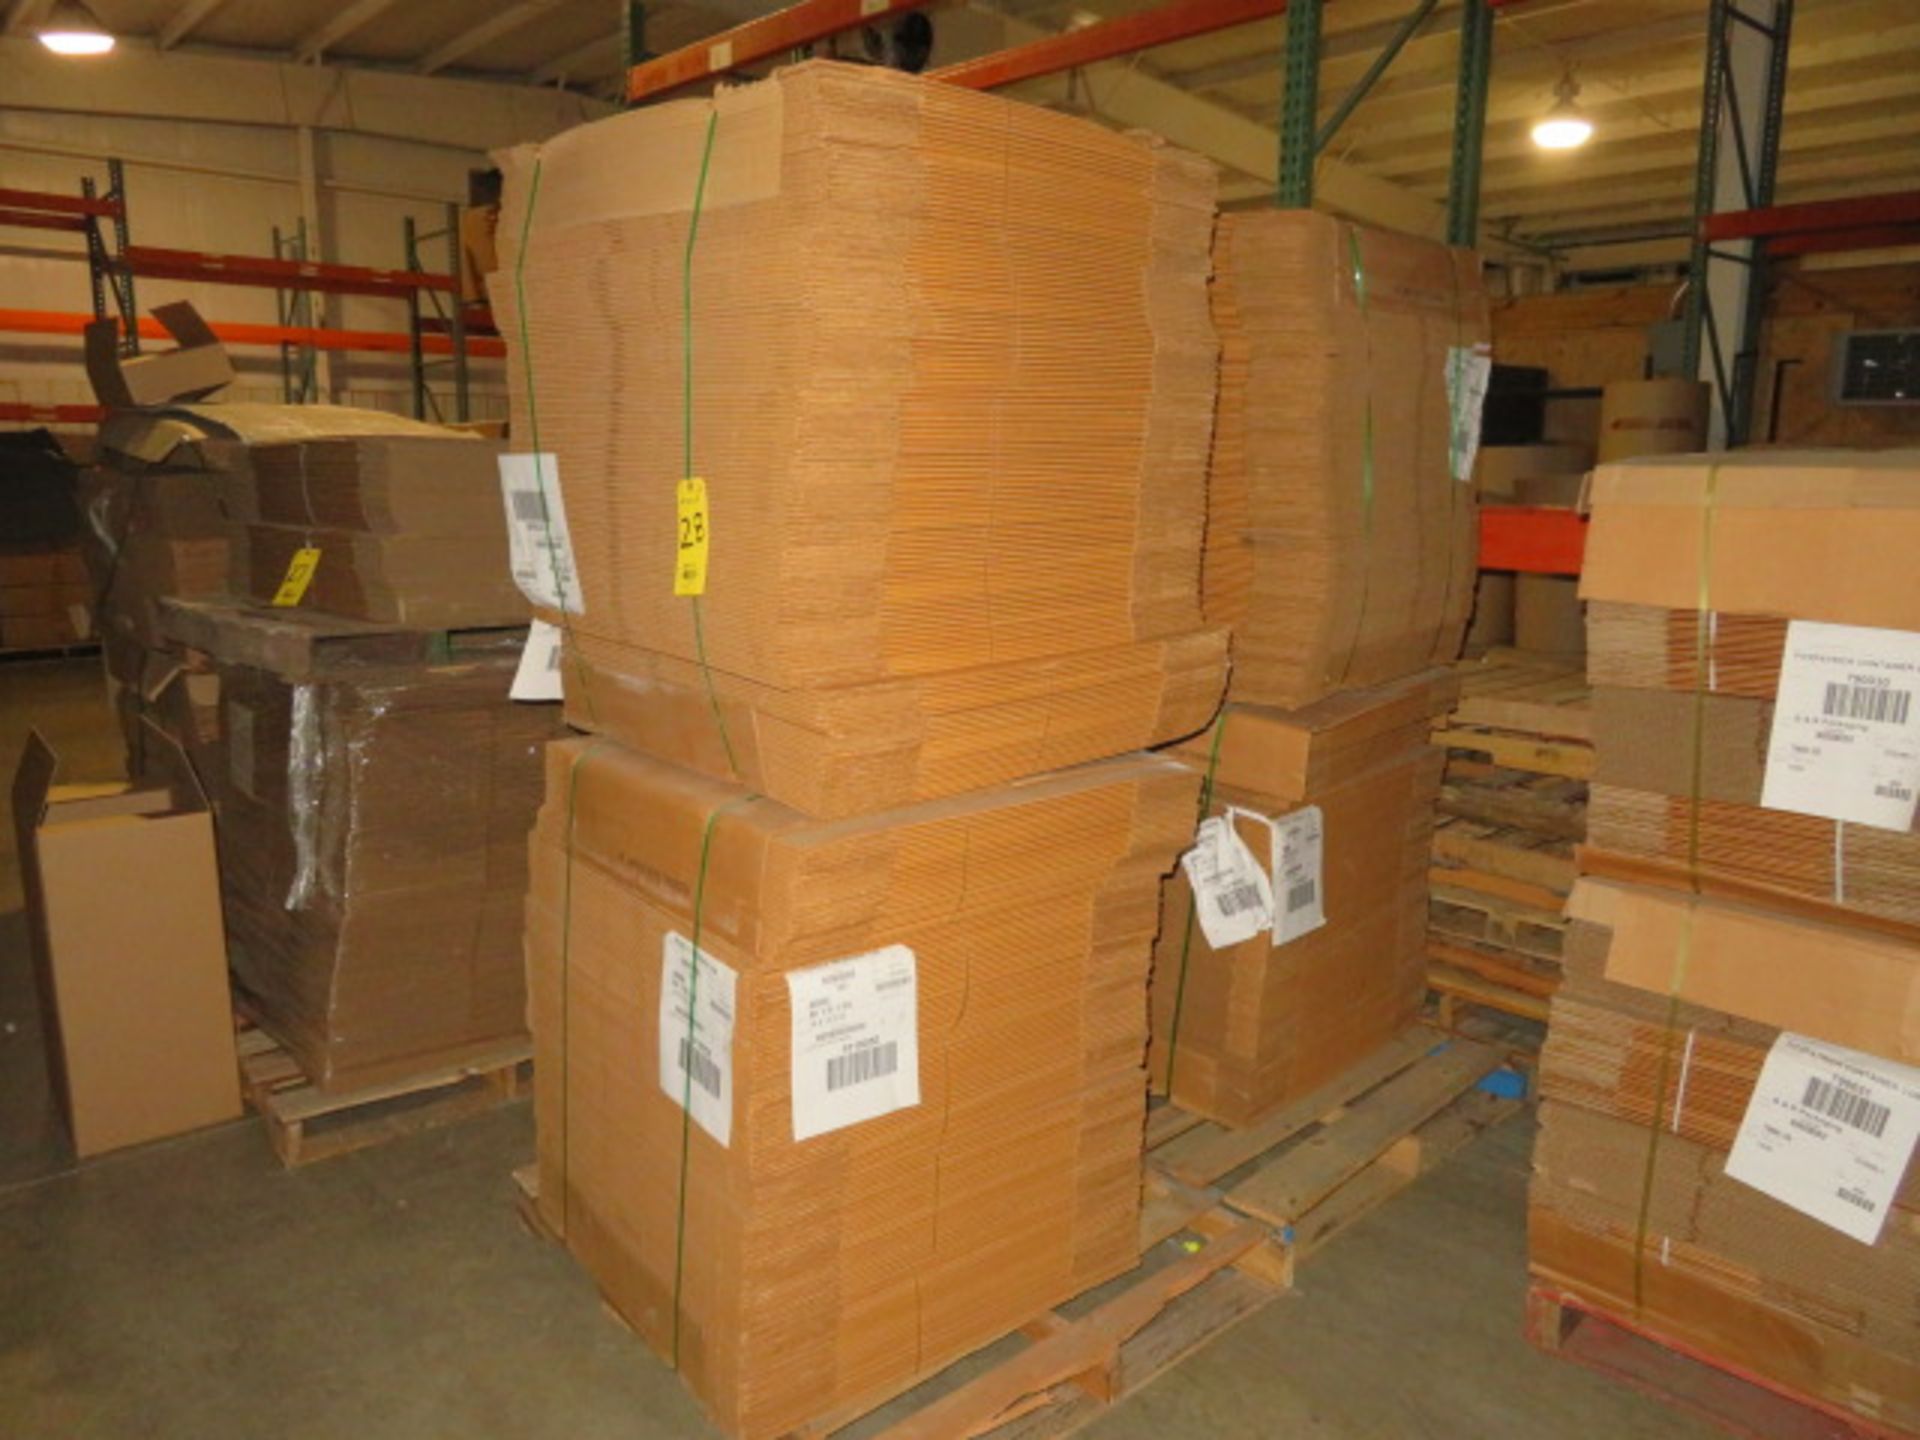 (500) 19 X 13 X 19 IN K/D CORRUGATED BOXES - Image 2 of 3